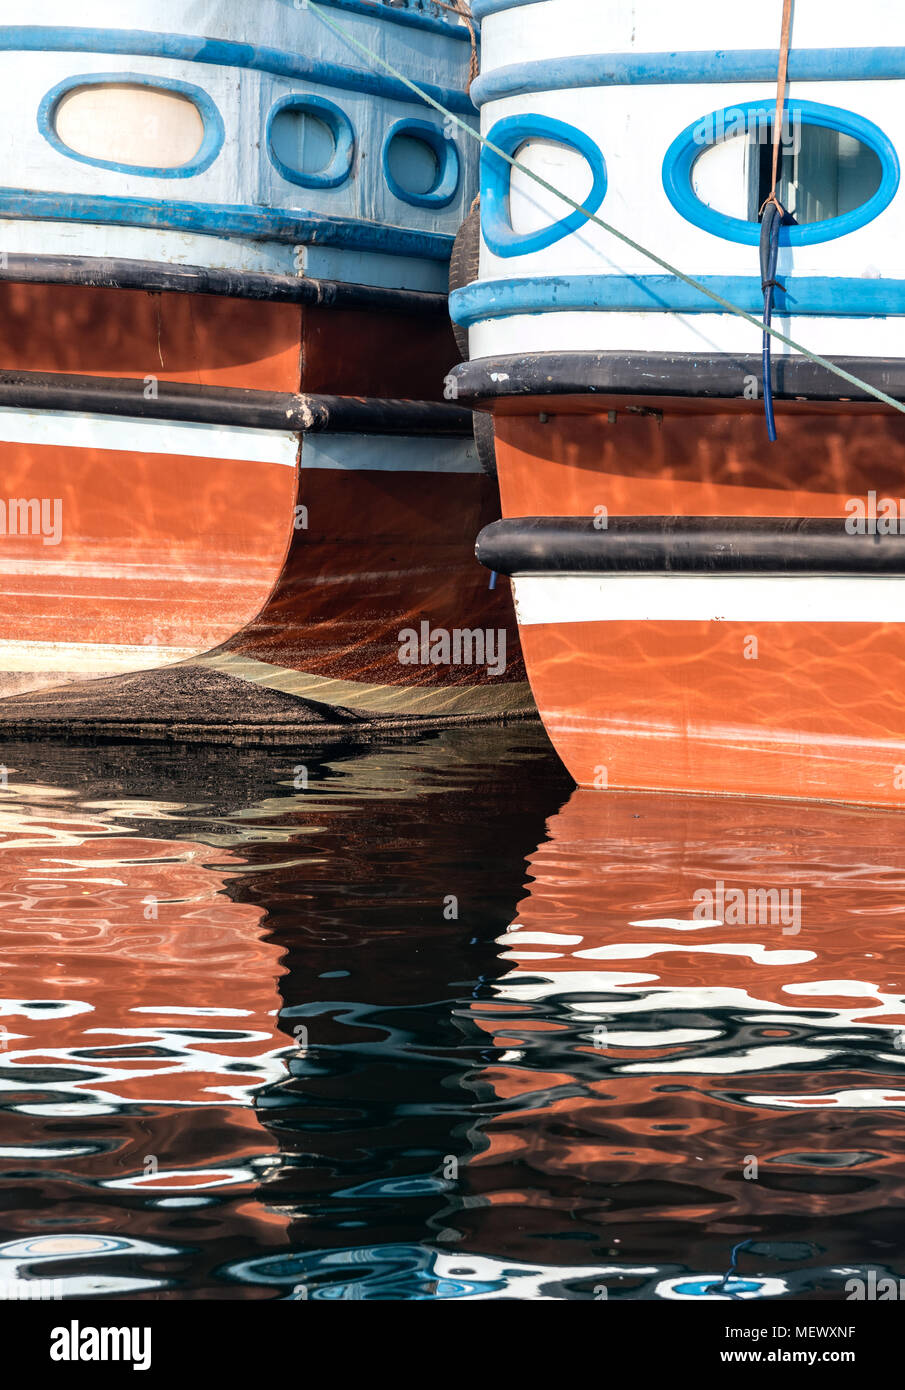 Pattern of a passenger wooden boat and its reflection in Dubai canal near Creek. Stock Photo